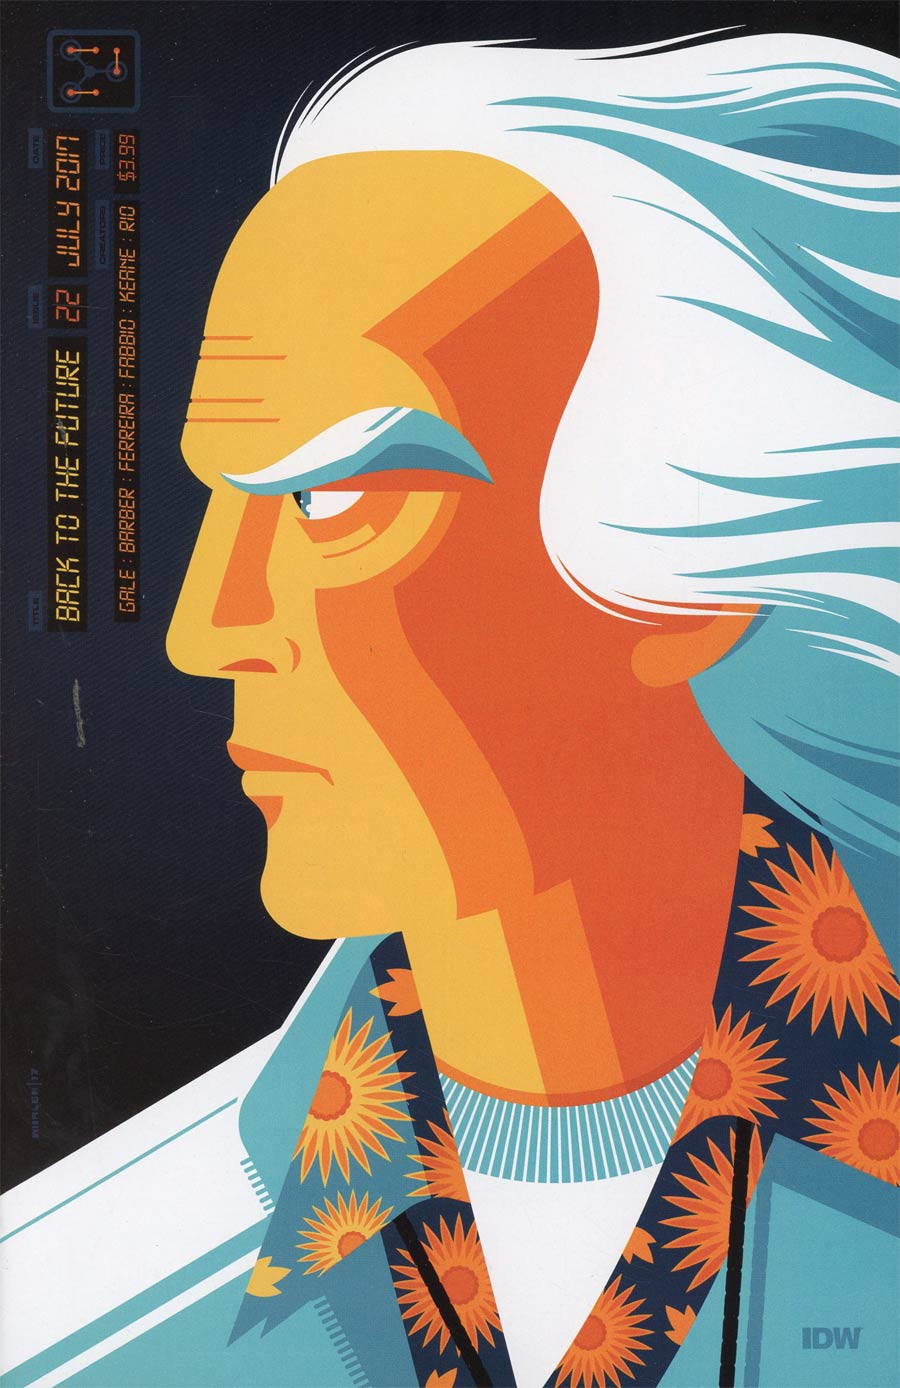 Back To The Future Vol 2 #22 Cover B Variant Tom Whalen Cover